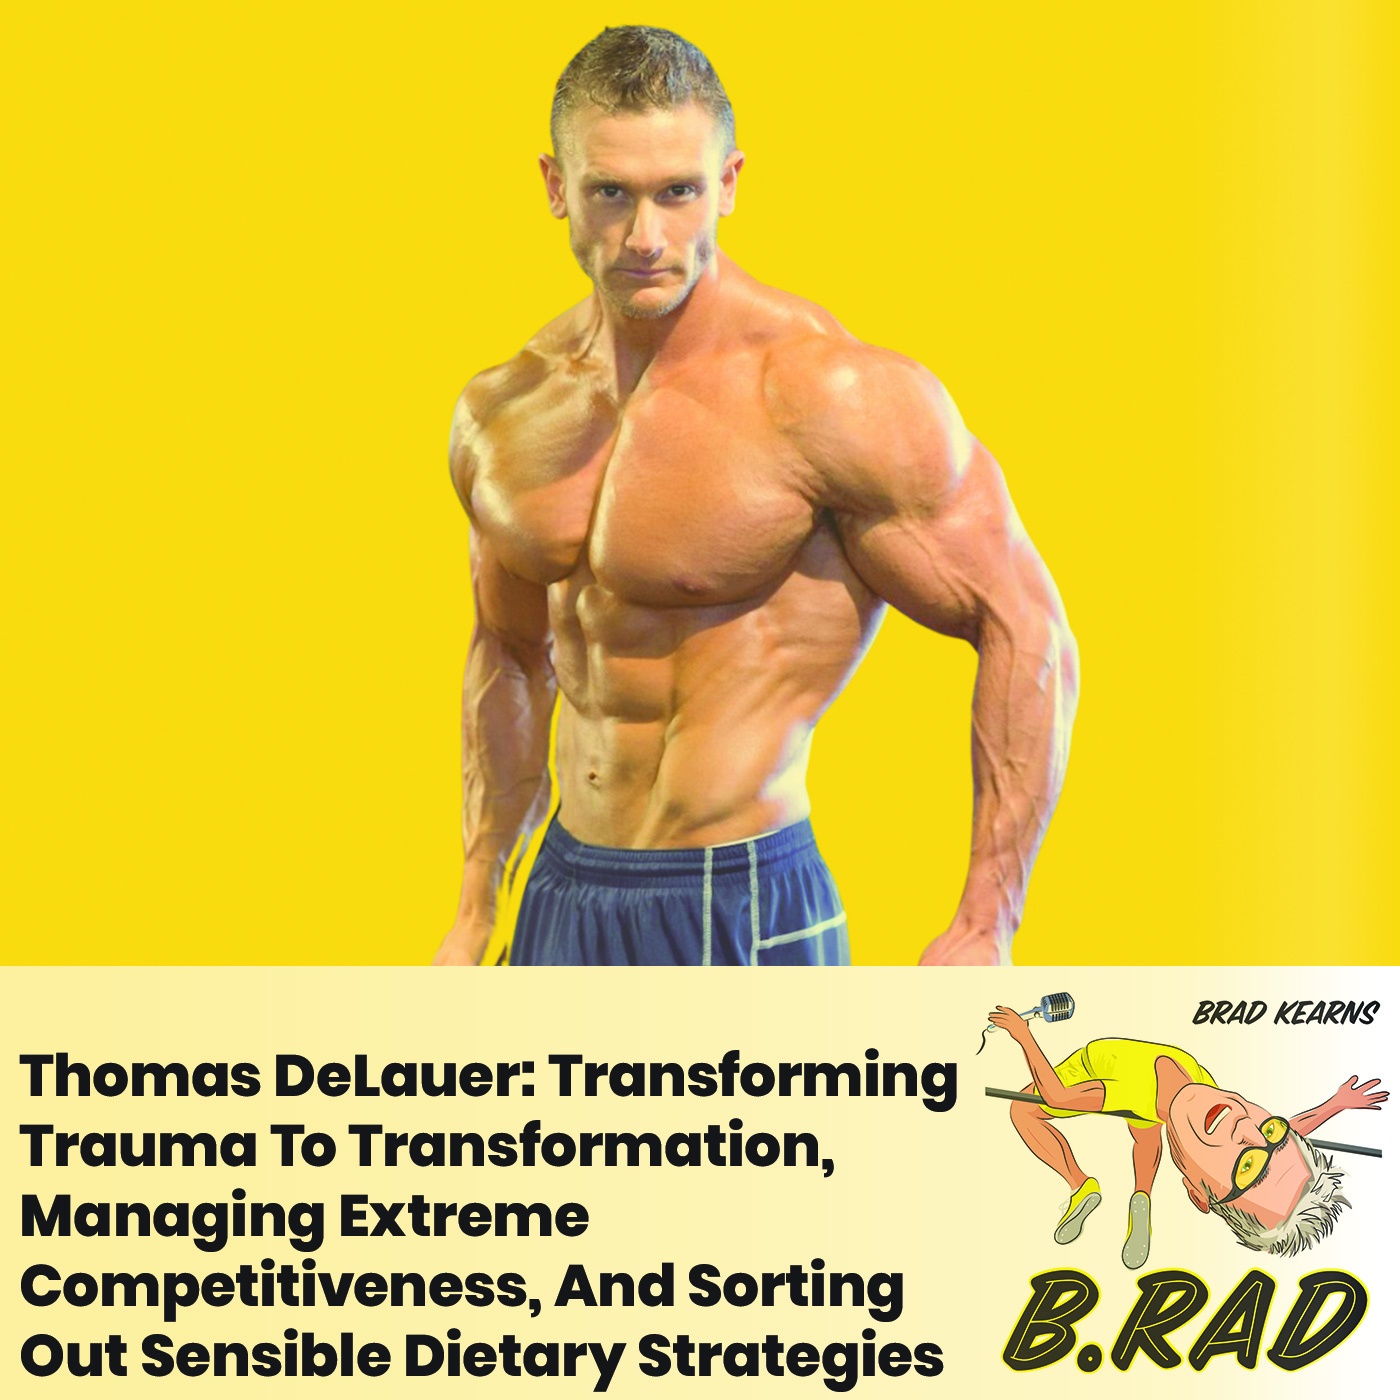 Thomas DeLauer: Transforming Trauma To Transformation, Managing Extreme Competitiveness, And Sorting Out Sensible Dietary Strategies